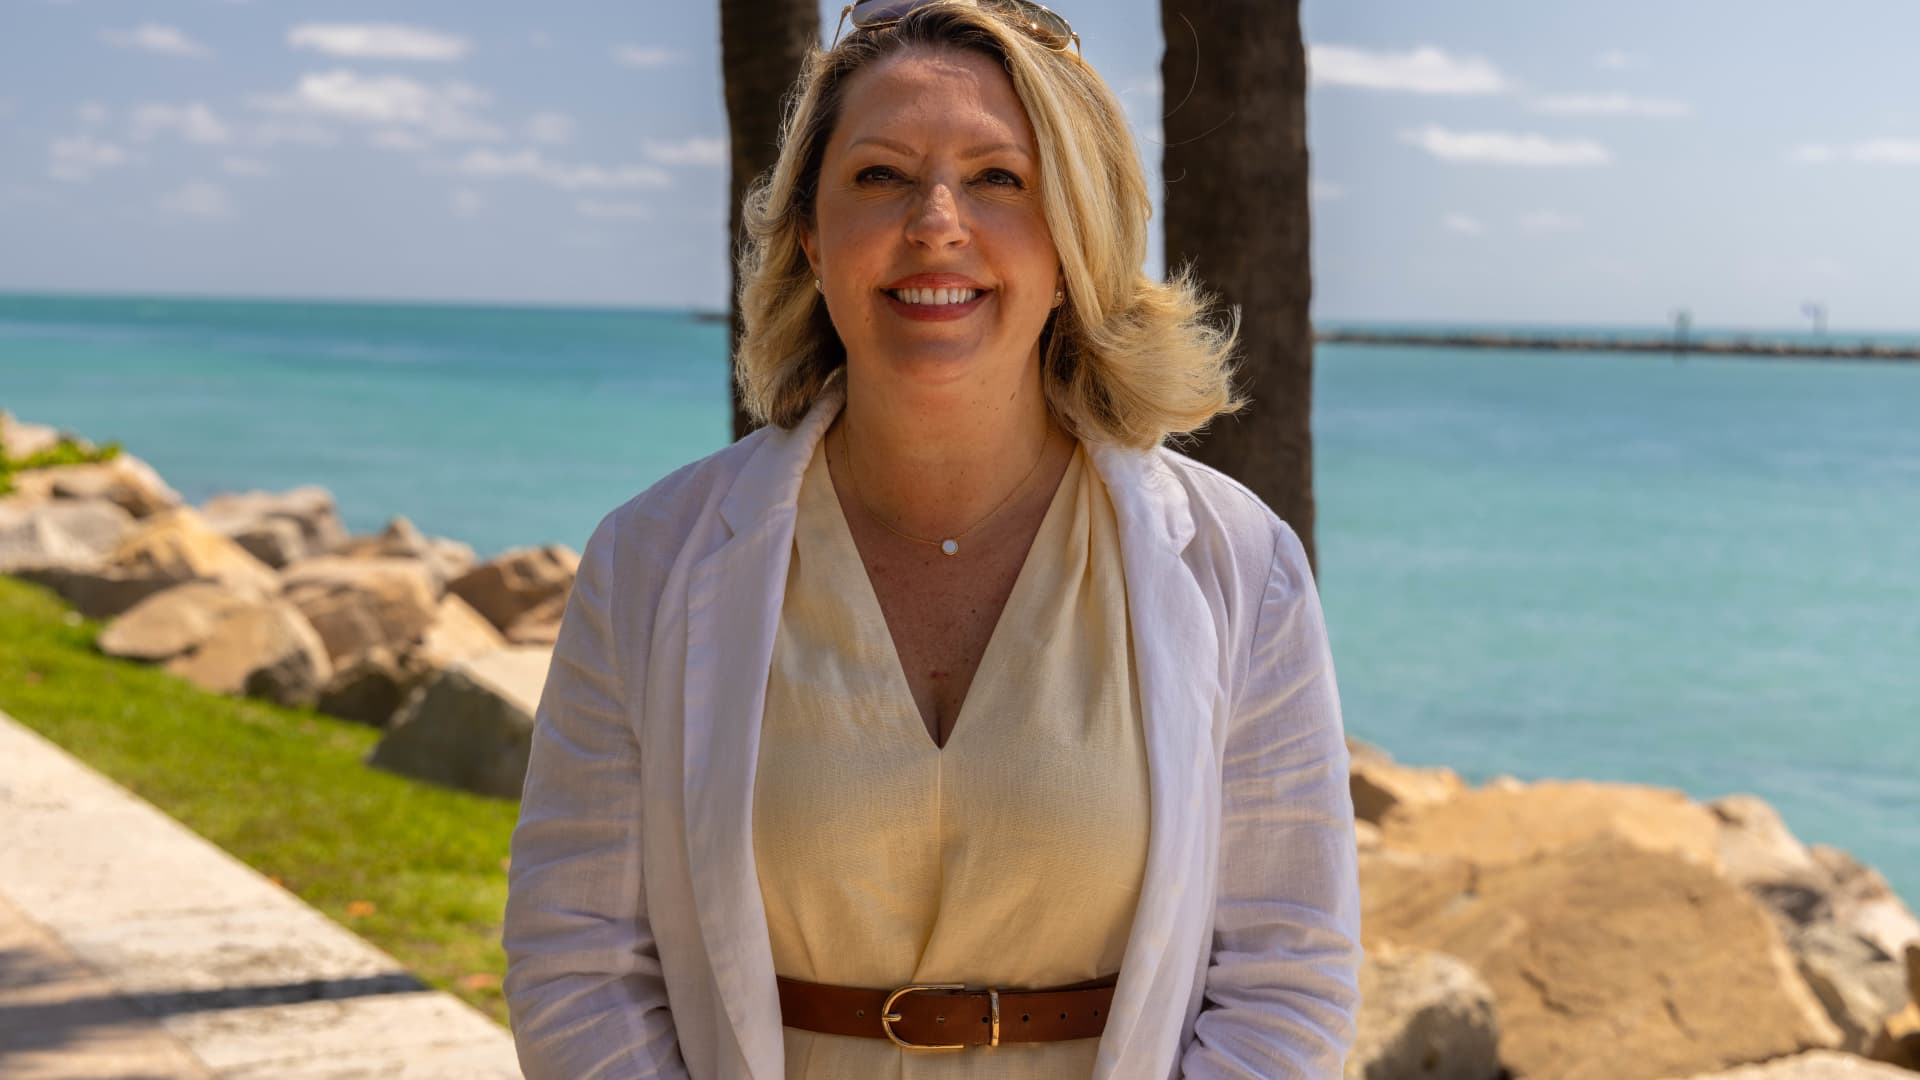 Amy Knowles, chief resilience officer and director of environment and sustainability for the City of Miami Beach